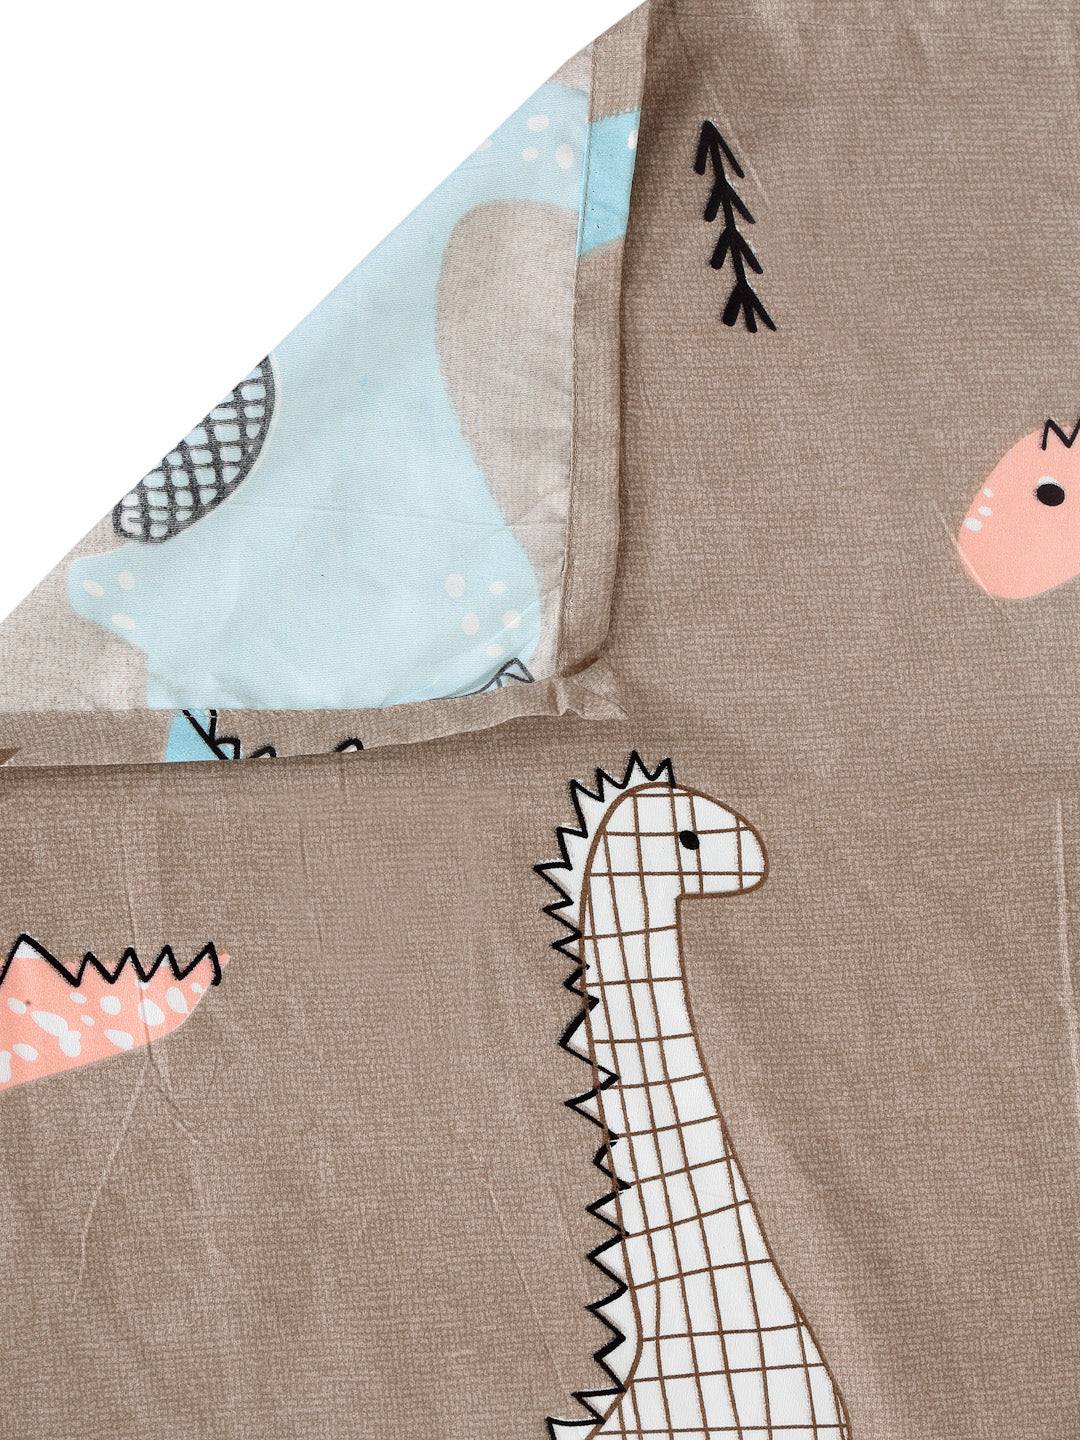 Special Kid's Edition Dinosaur Blue Bed Sheet Set with Pillow Covers by KLOTTHE®